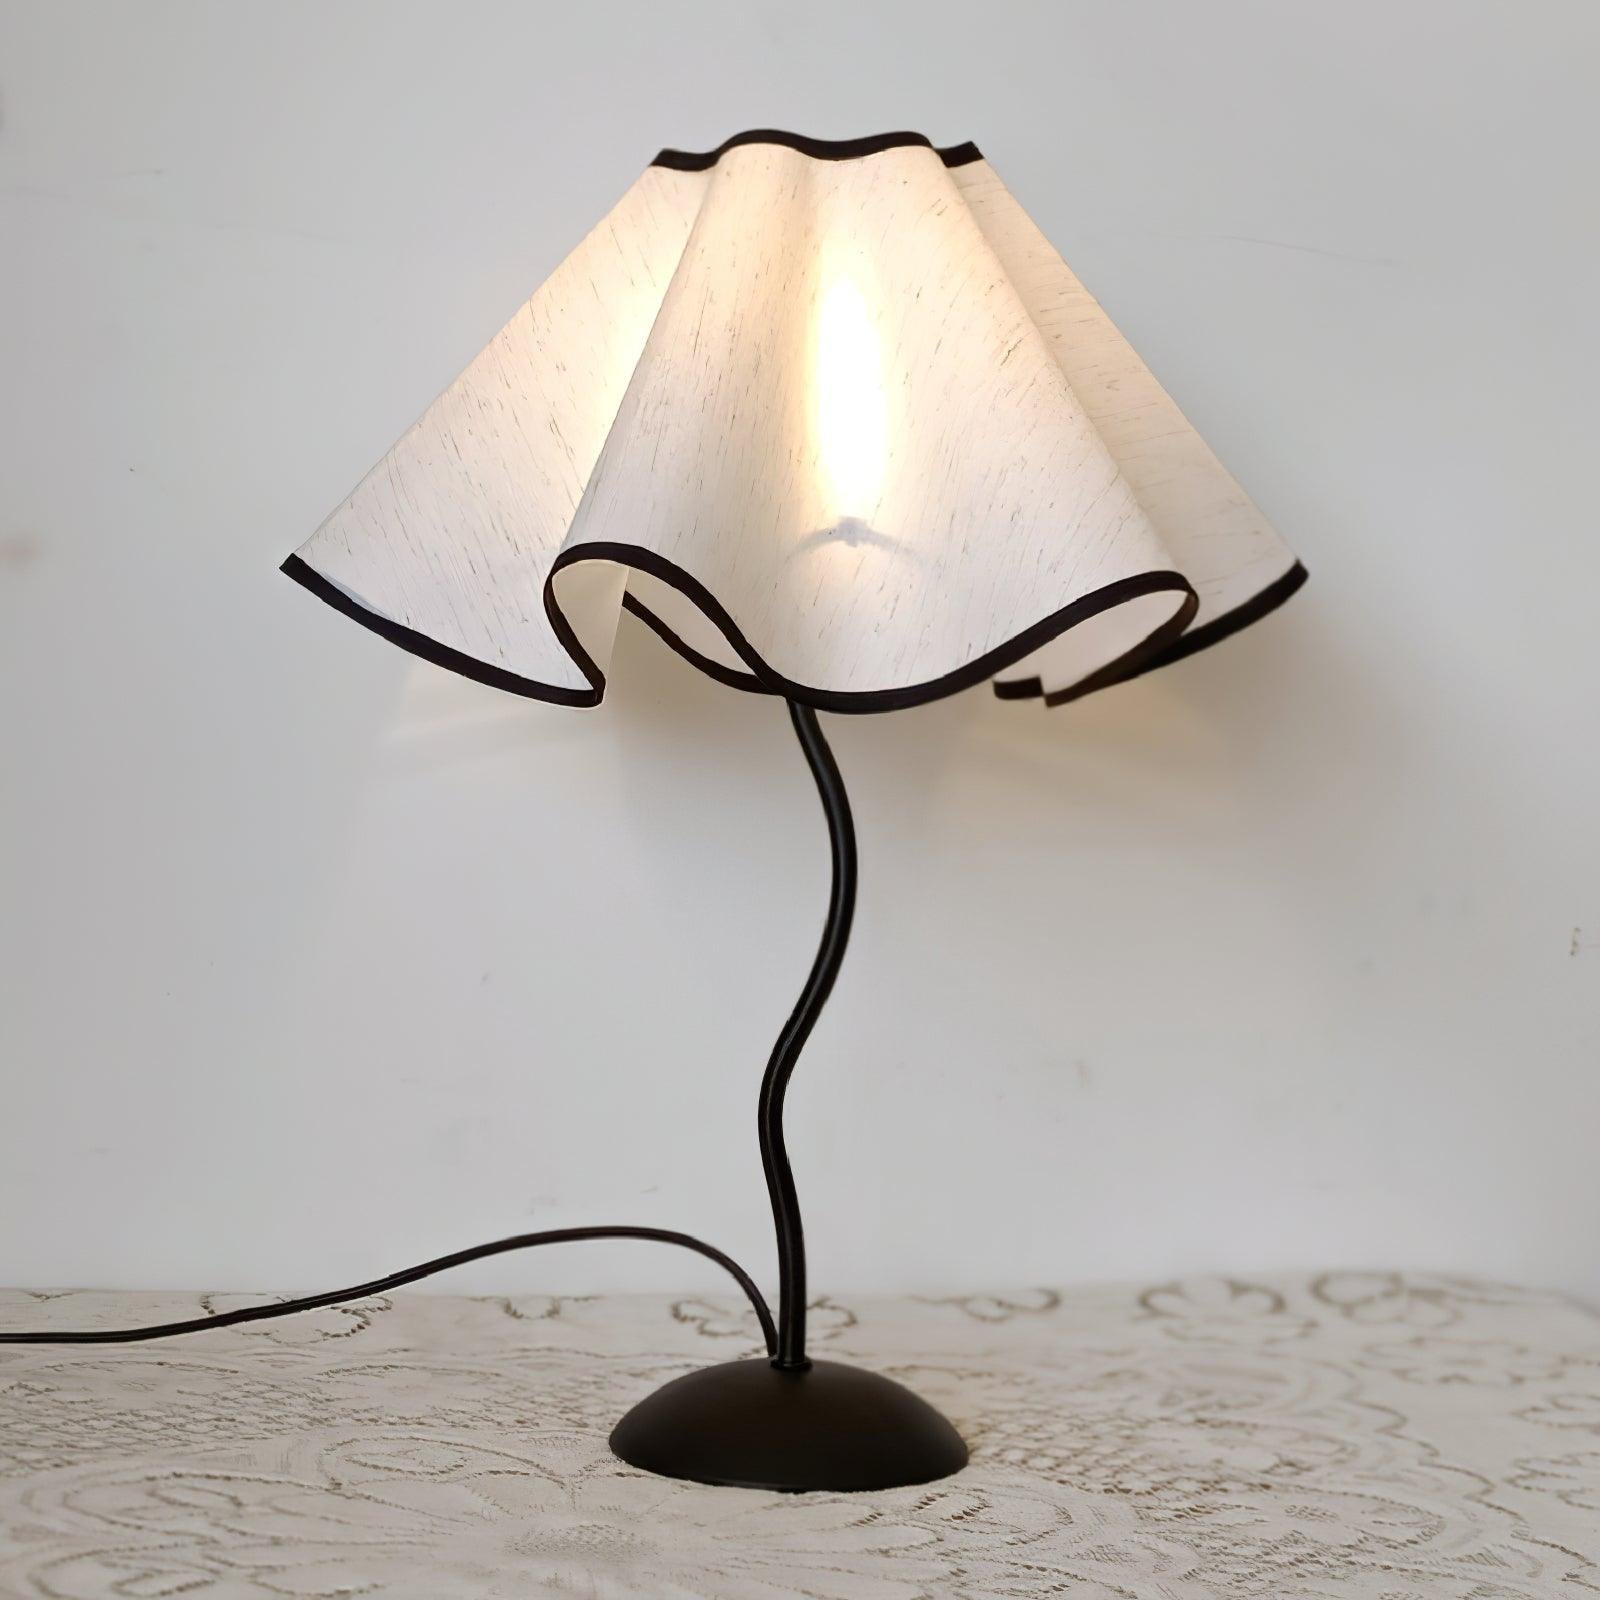 Black and White Linen Cora Table Lamp with a UK plug, measuring Ø 14.1" x H 18.5" (36cm x 47cm)